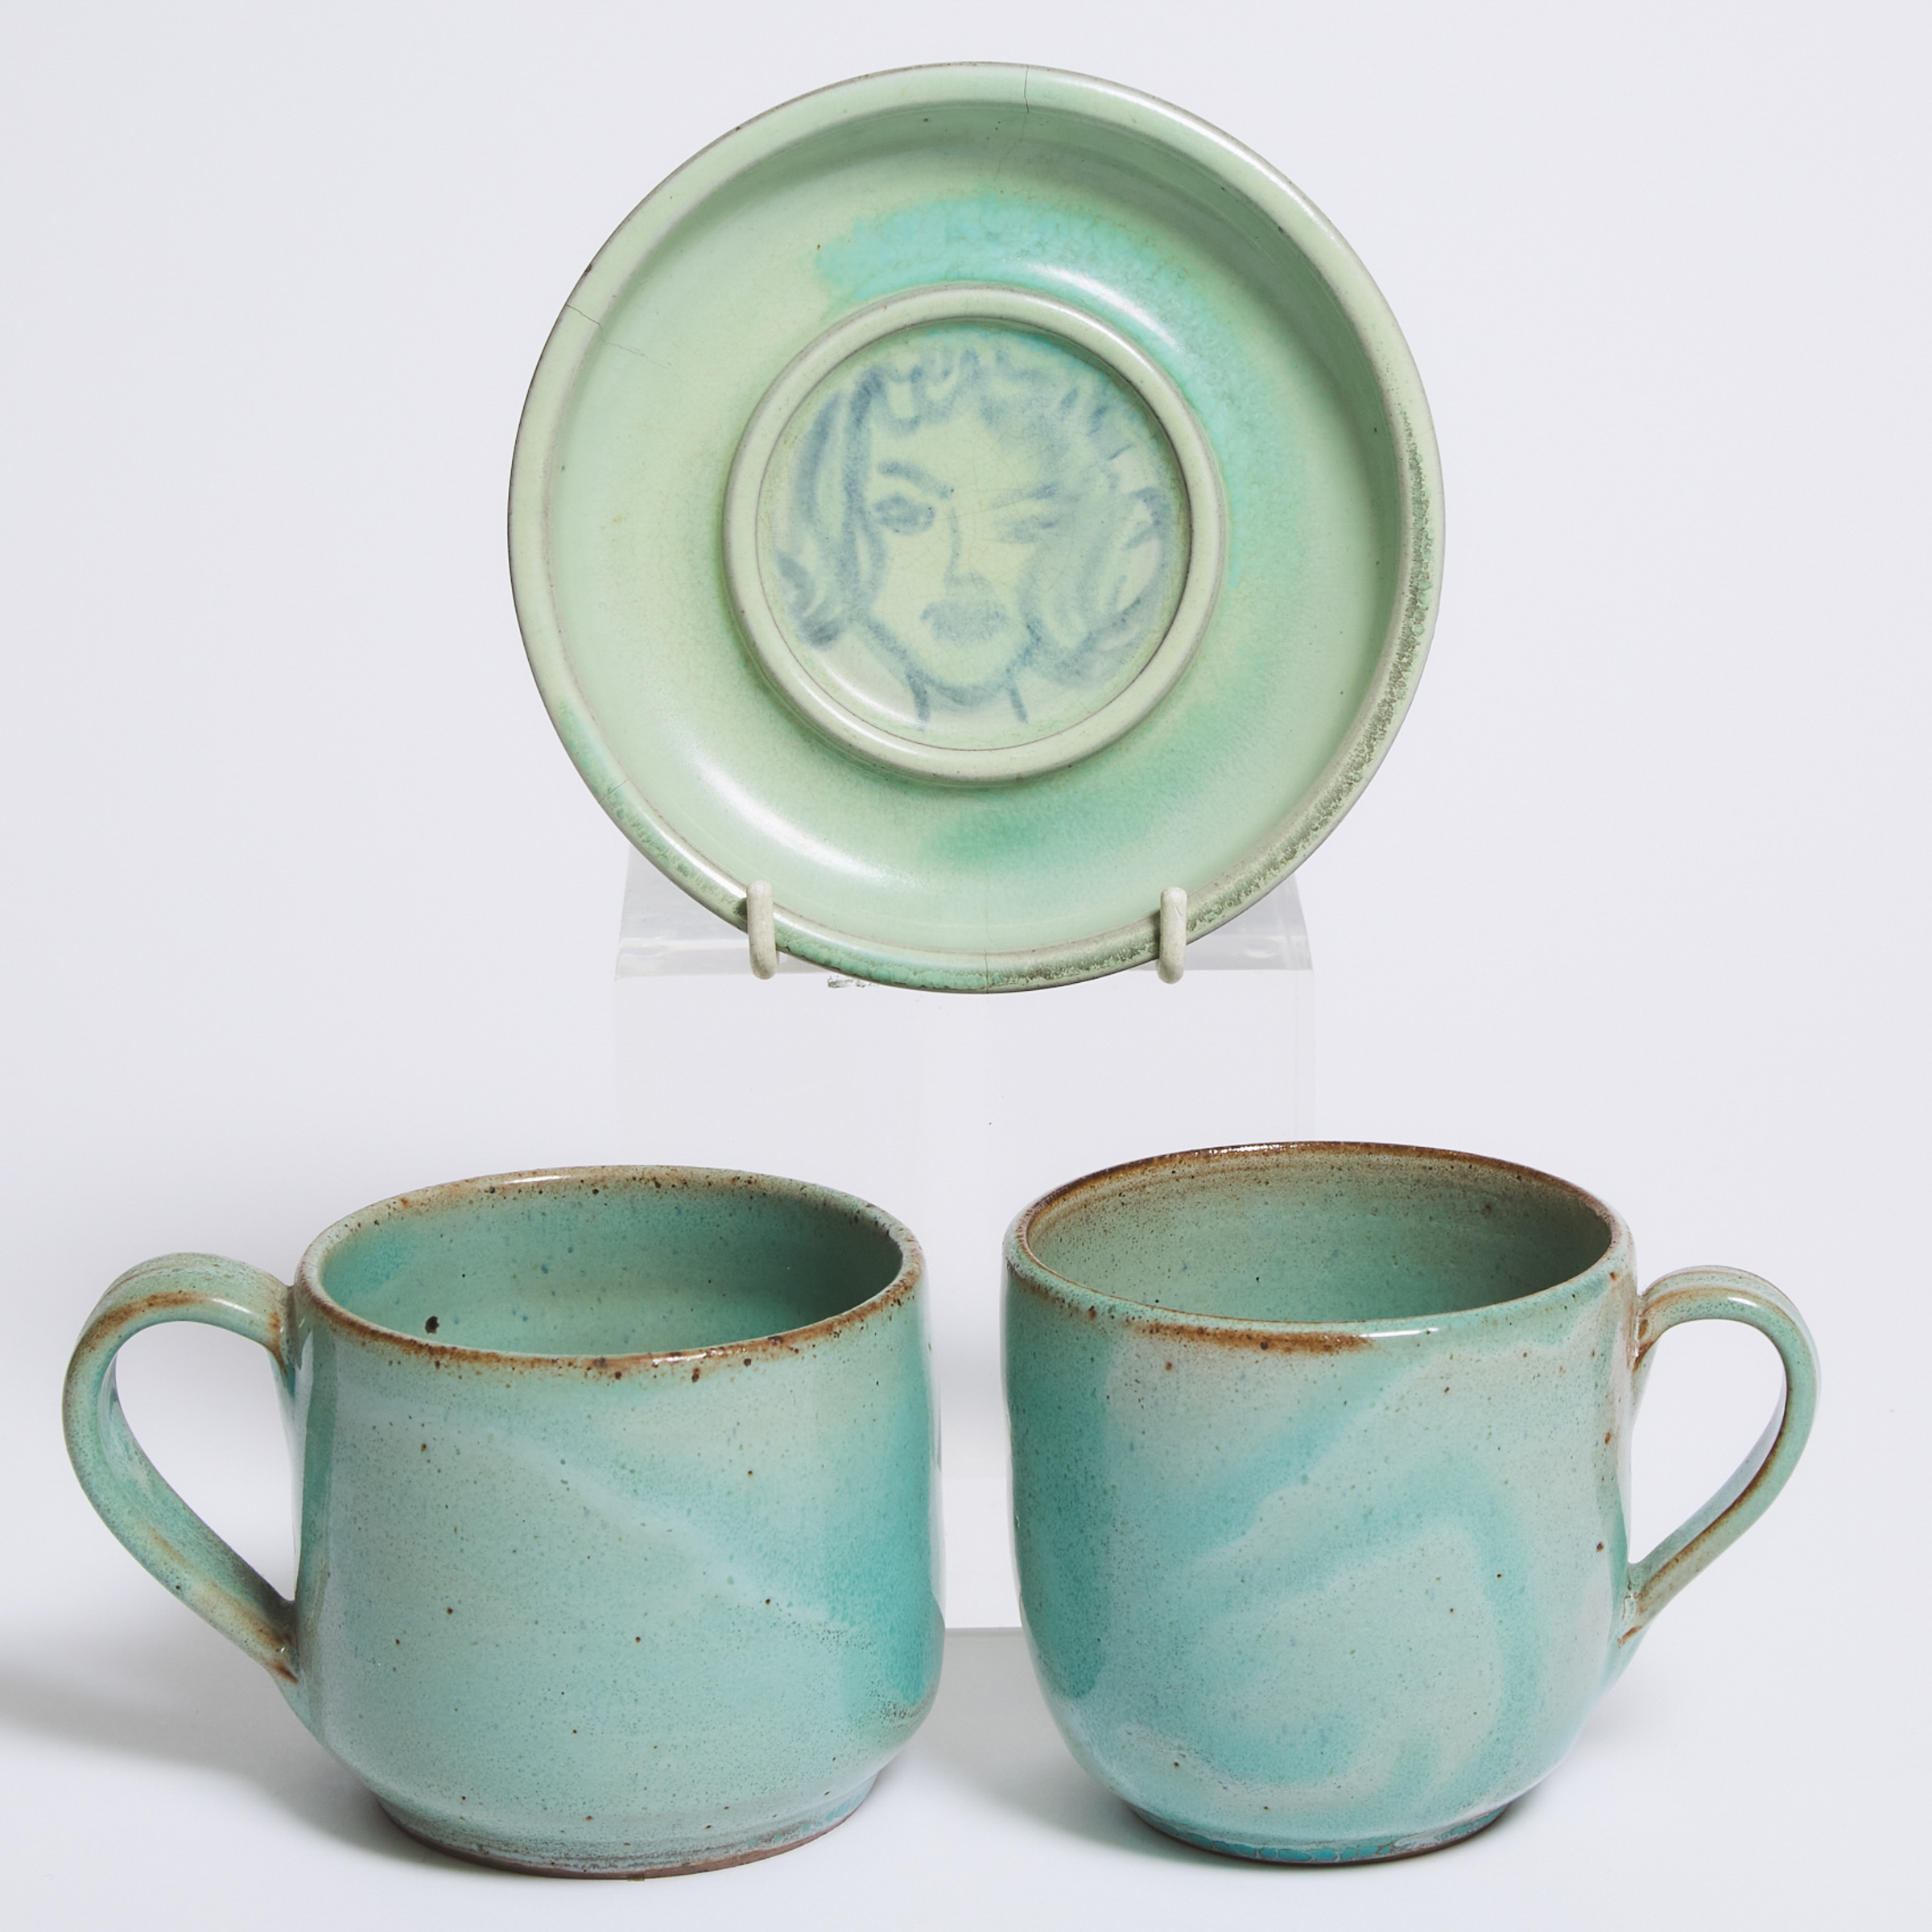 Two Deichmann Mottled Green Glazed Stoneware Mugs and a Small Portrait Dish, mid-20th century